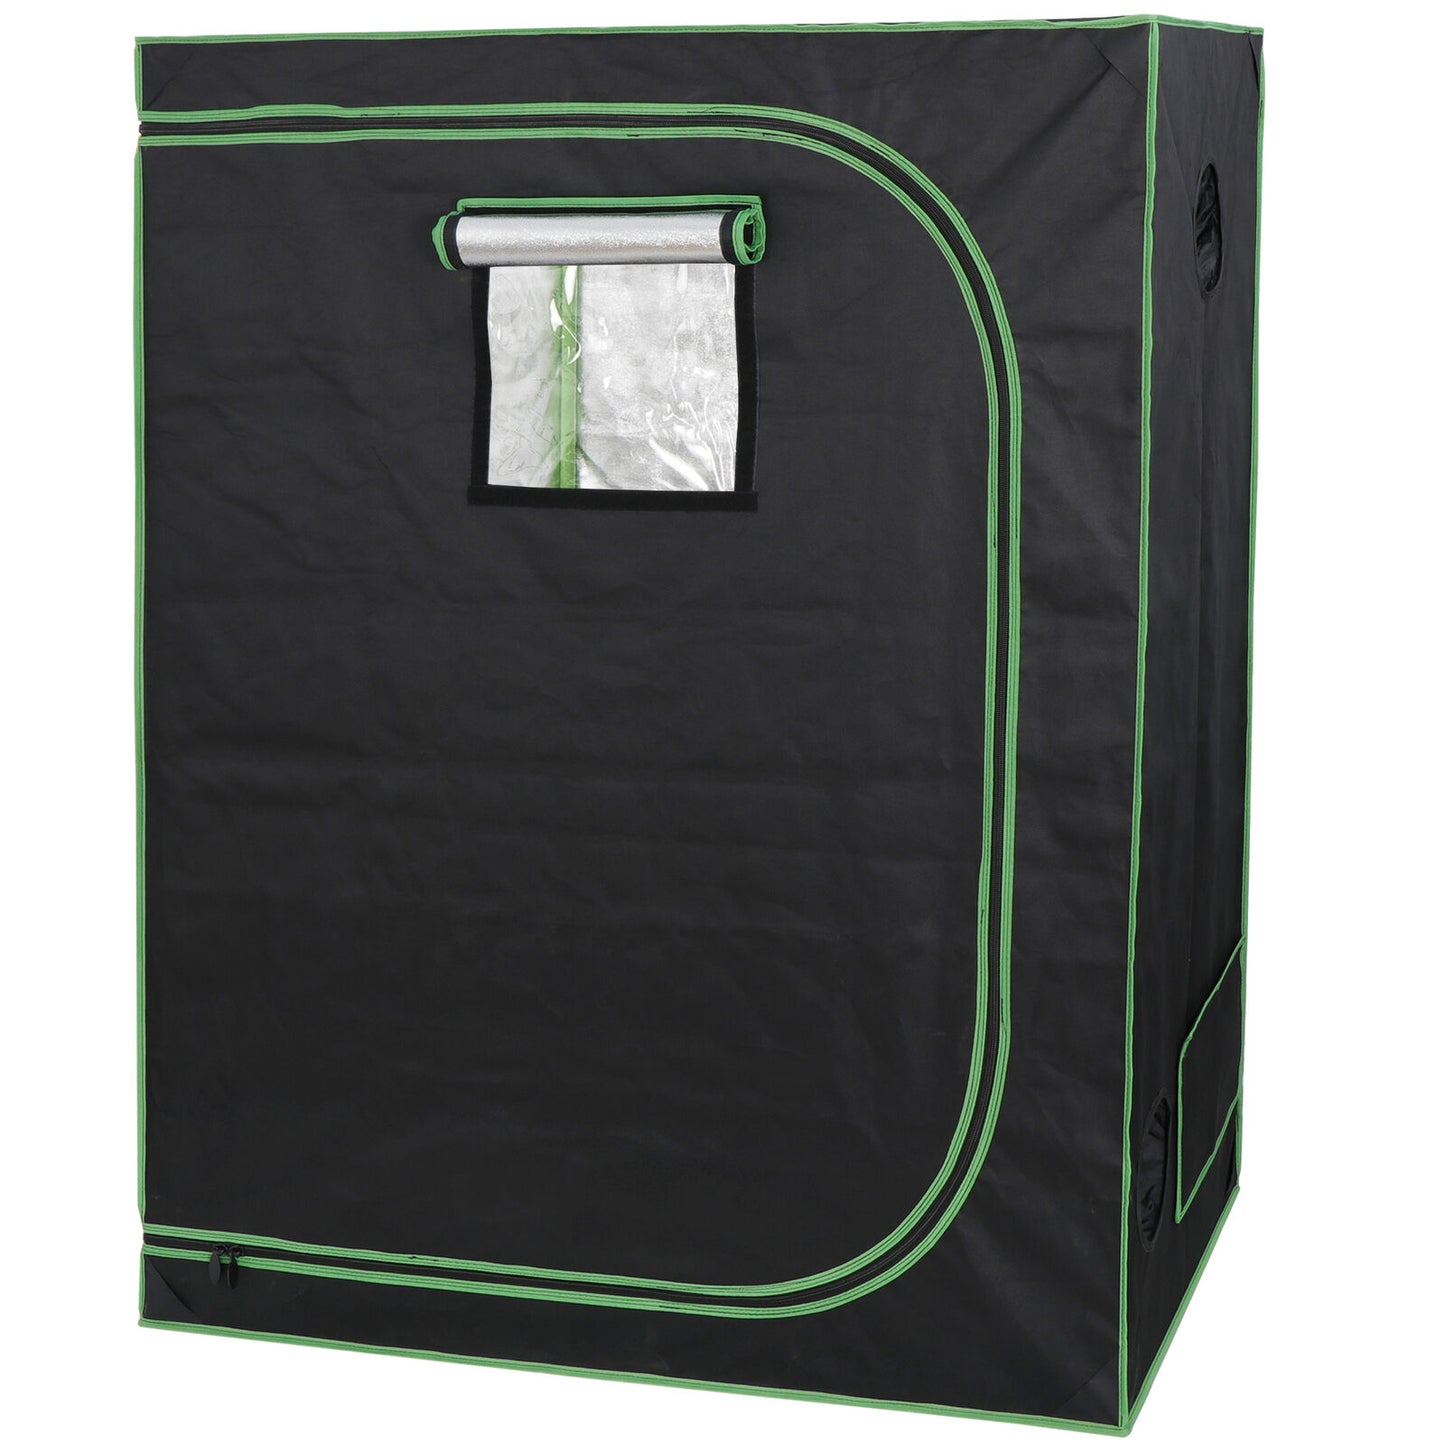 48"x24"x60" Hydroponic Grow Tent with Observation Window Floor Tray for Plant